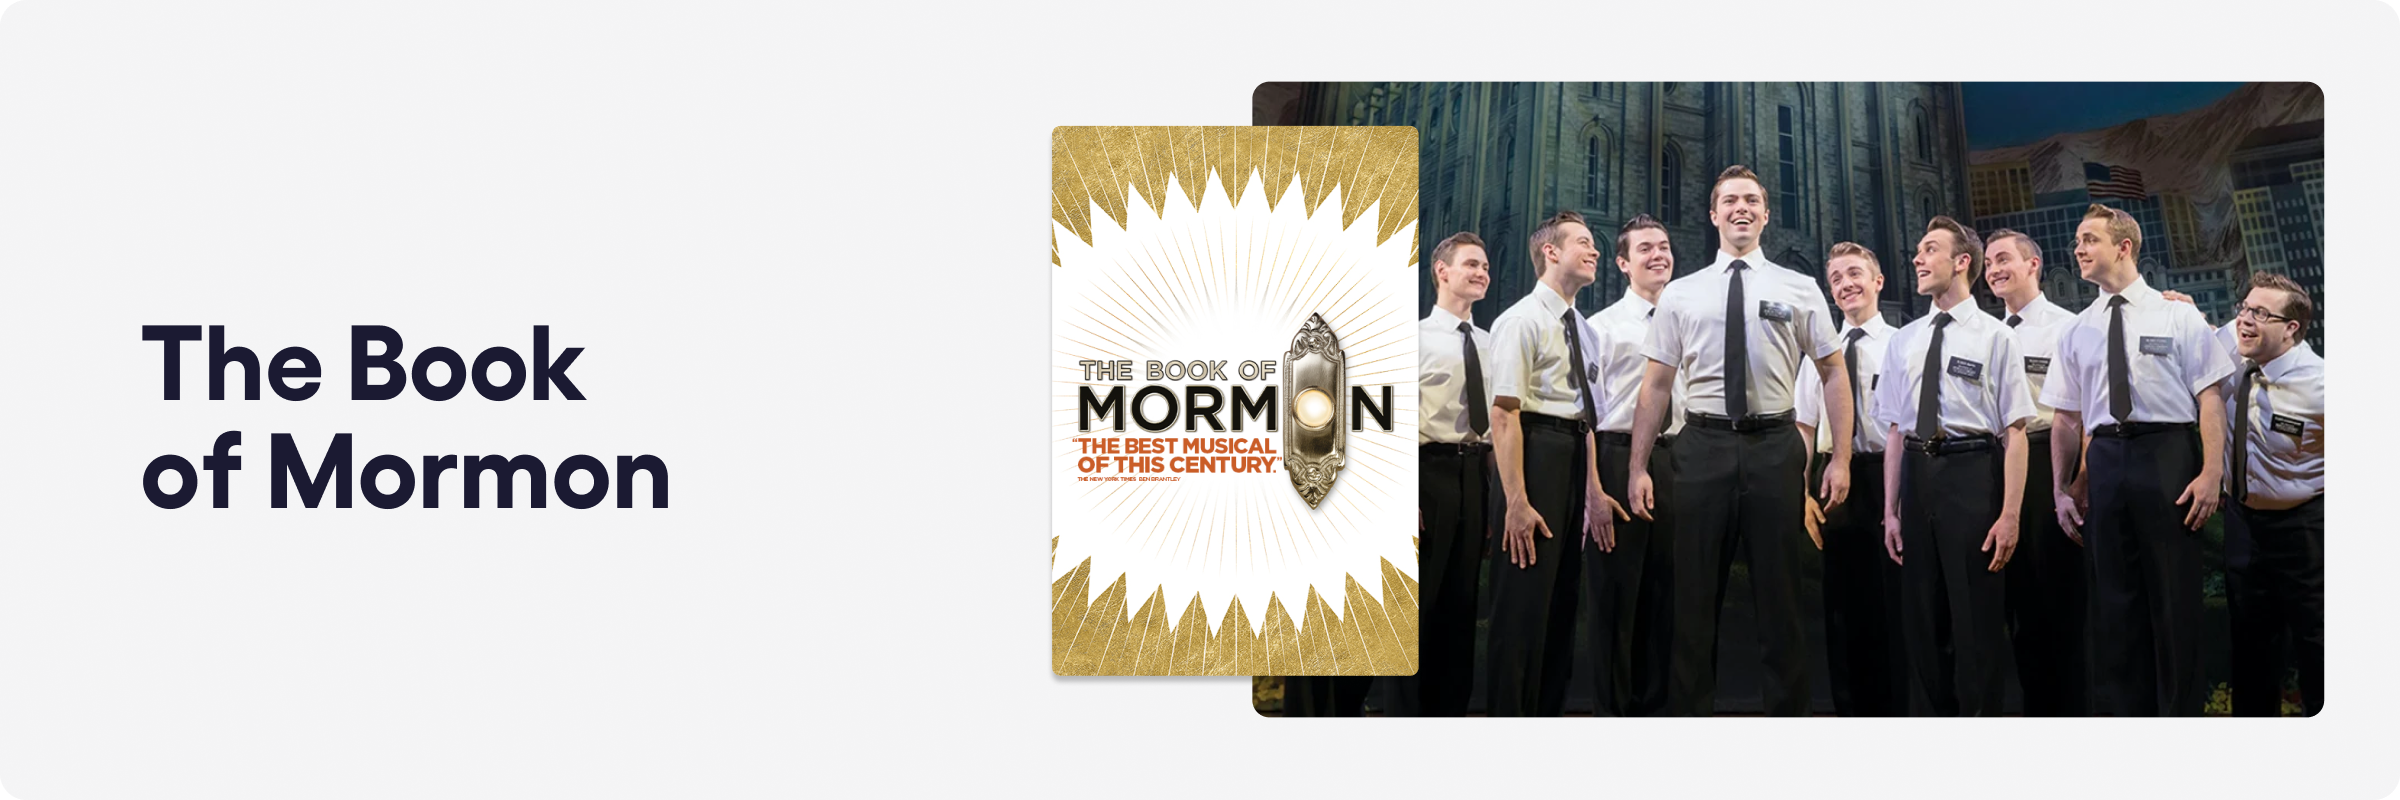 Recommended Shows - The Book of Mormon